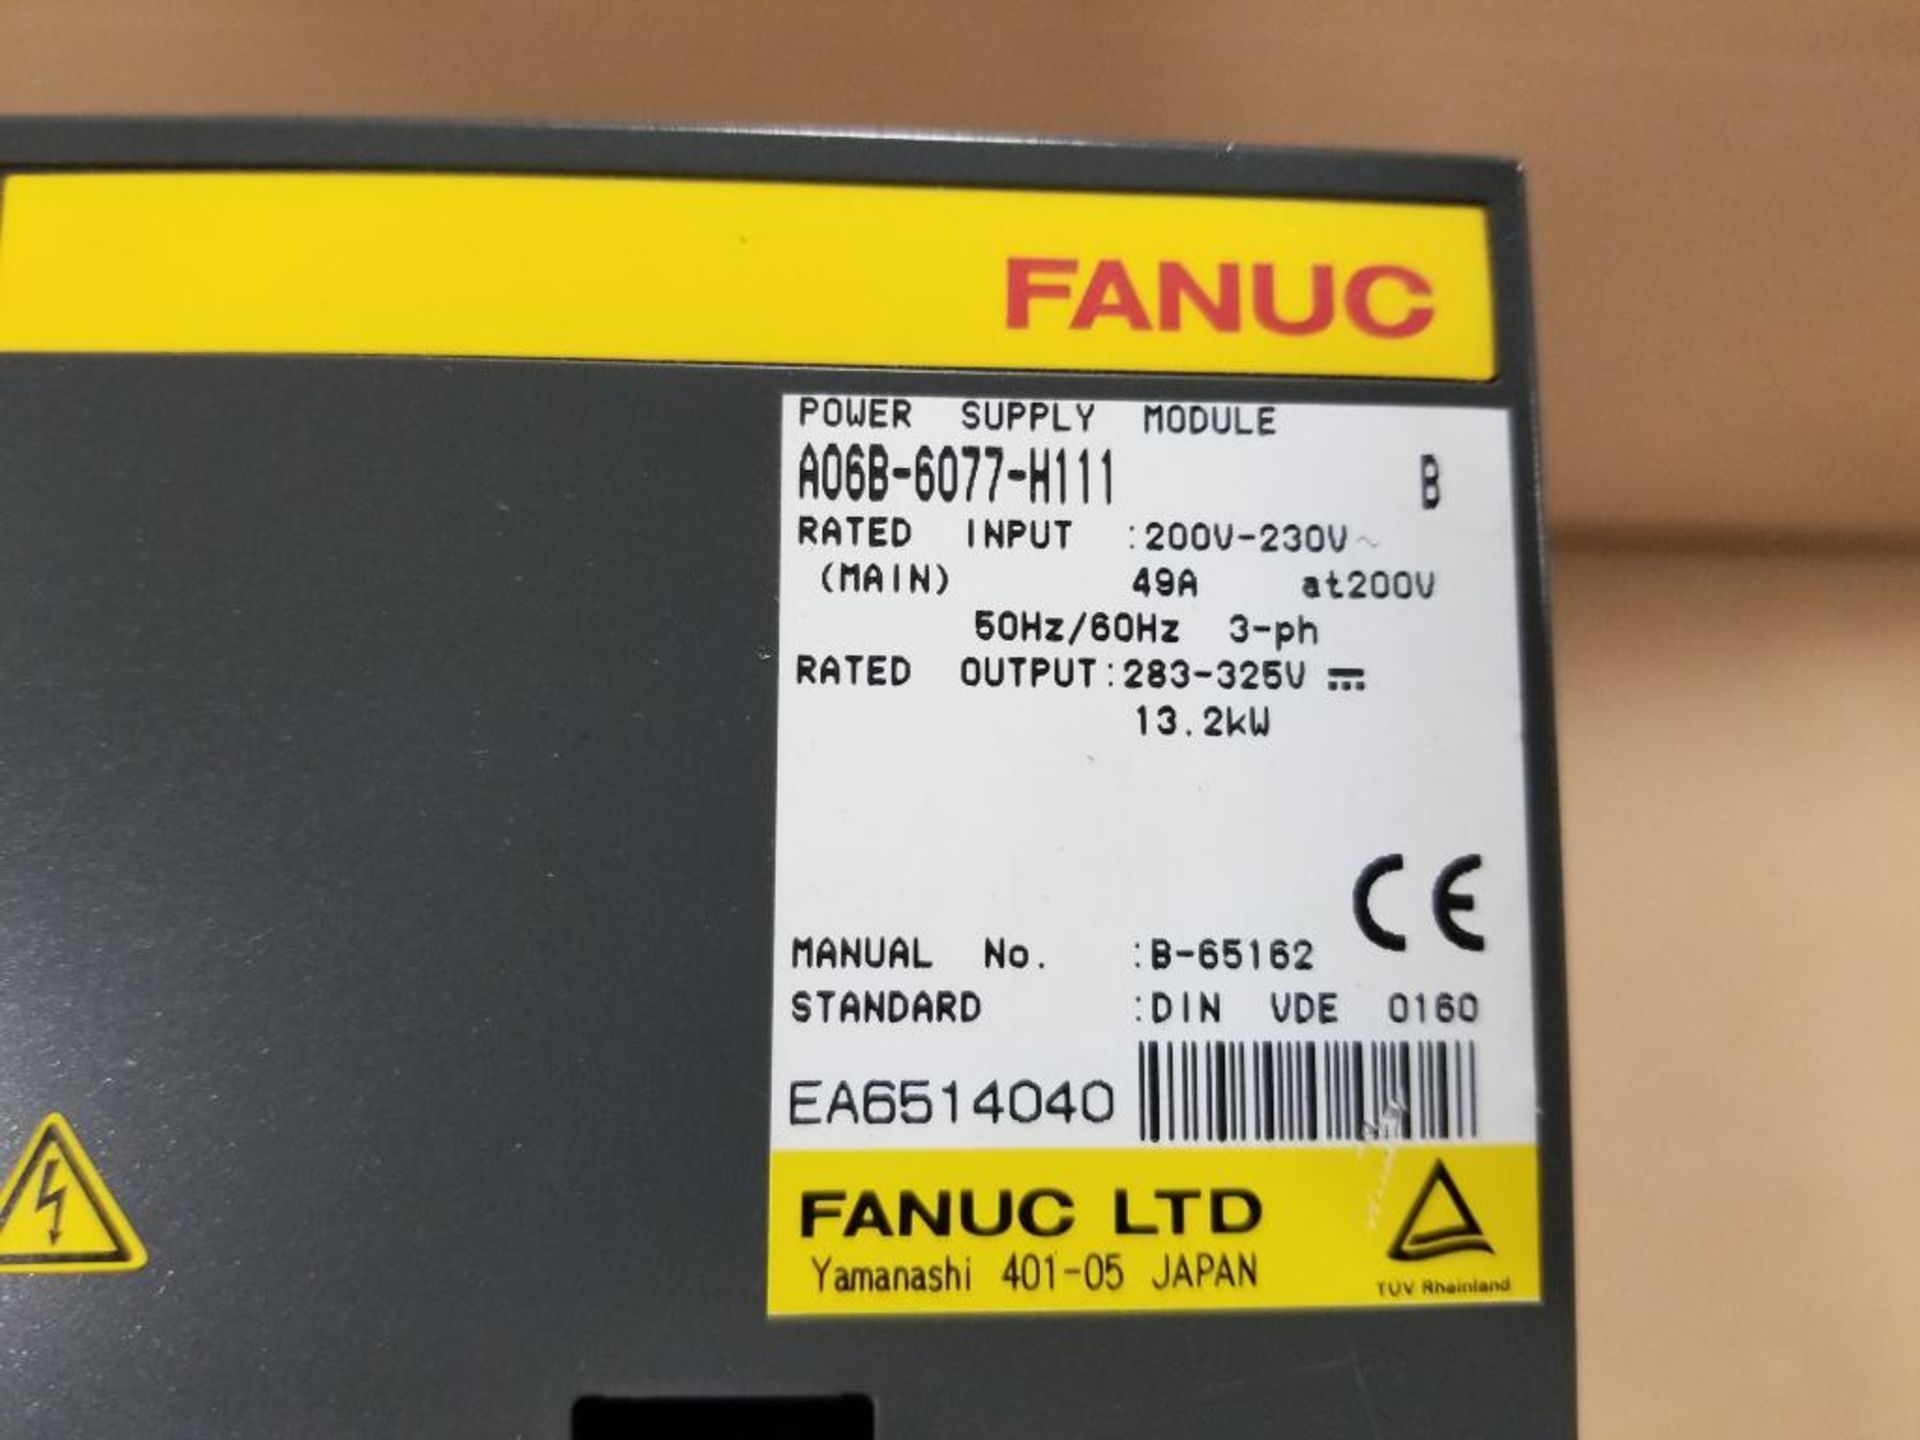 Fanuc A06B-6077-H111 power supply module. 13.2kW output. - Image 5 of 7